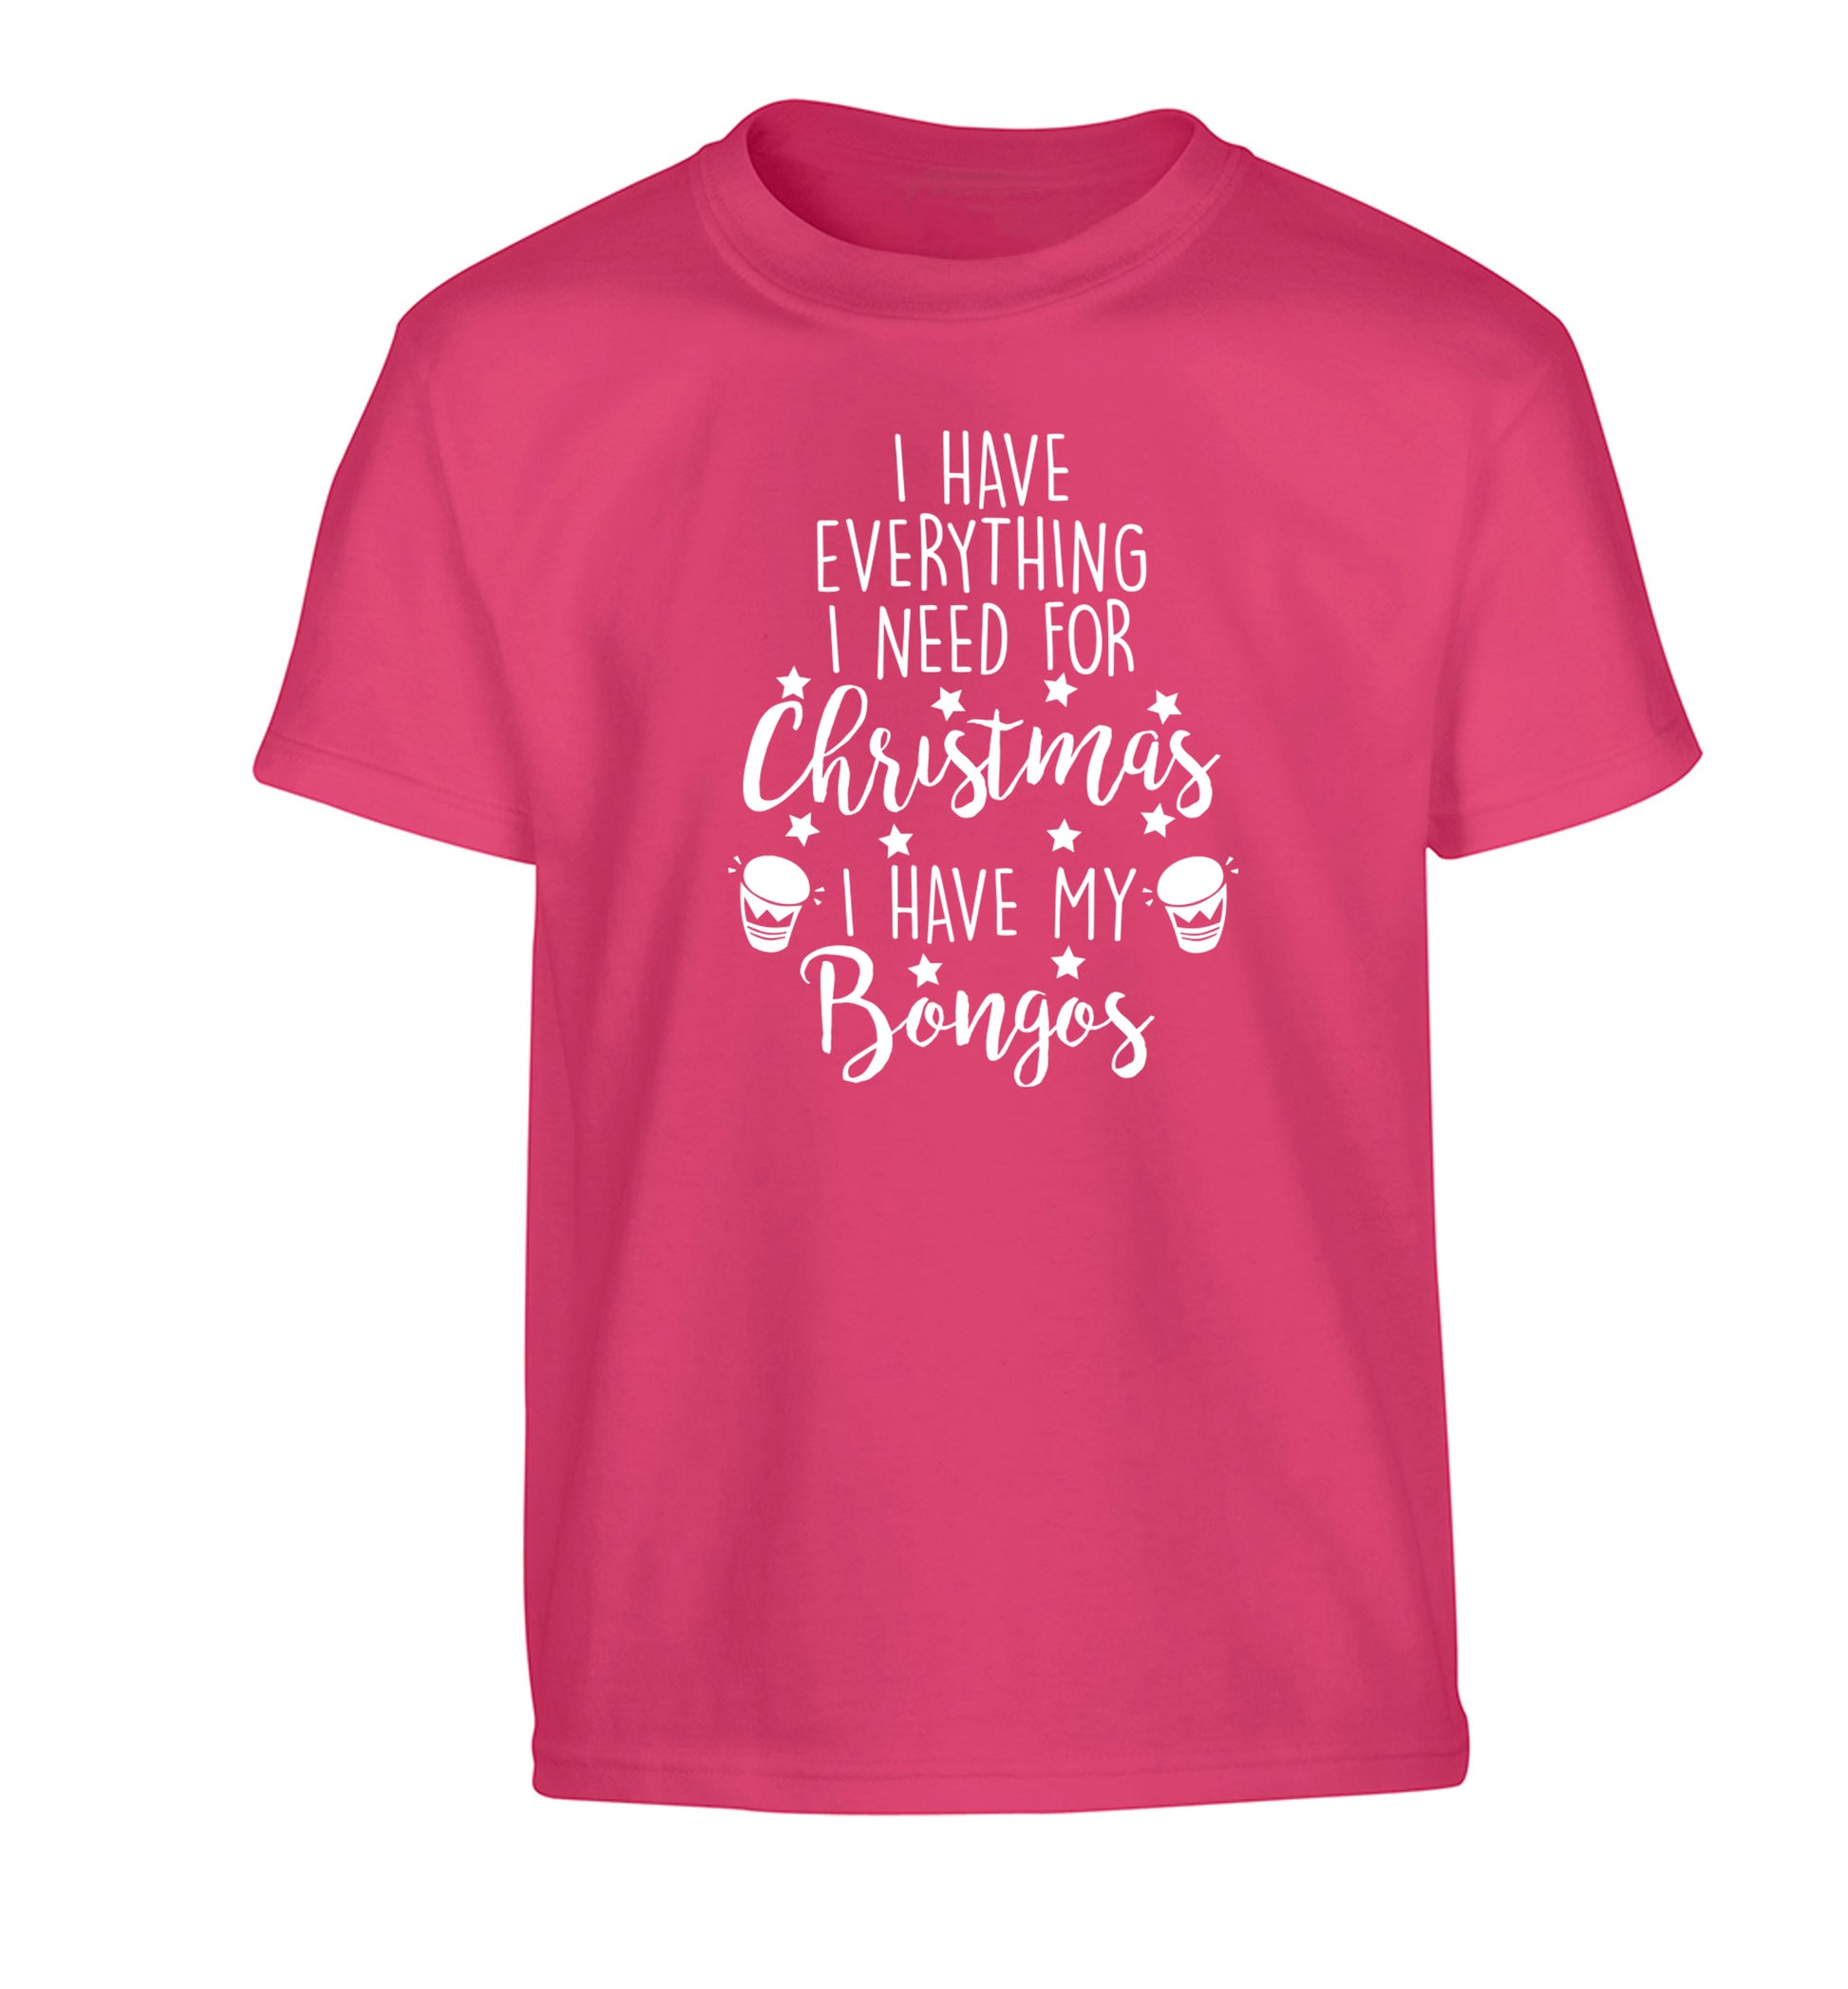 I have everything I need for Christmas I have my bongos! Children's pink Tshirt 12-14 Years